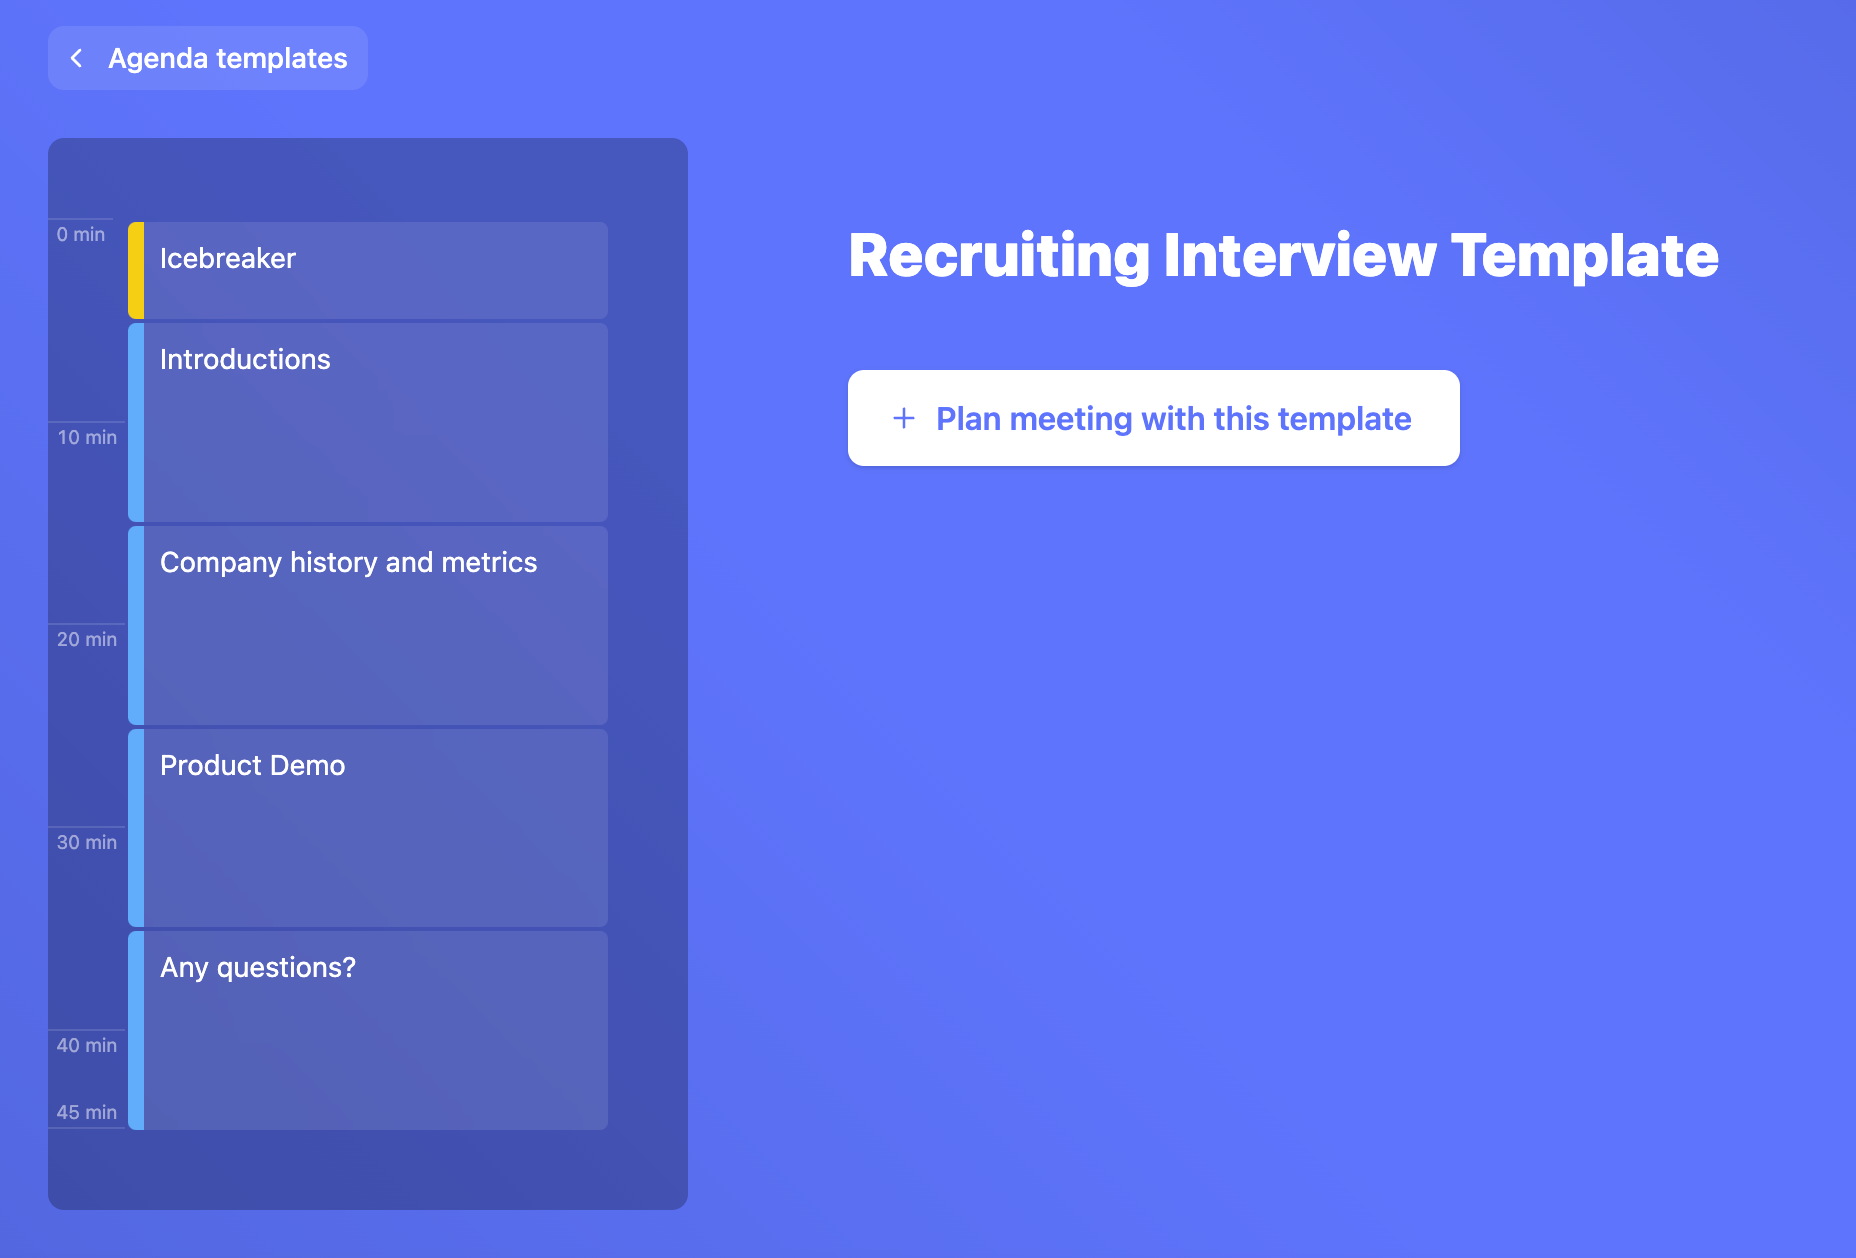 4 Tips to improve your remote team's interview process